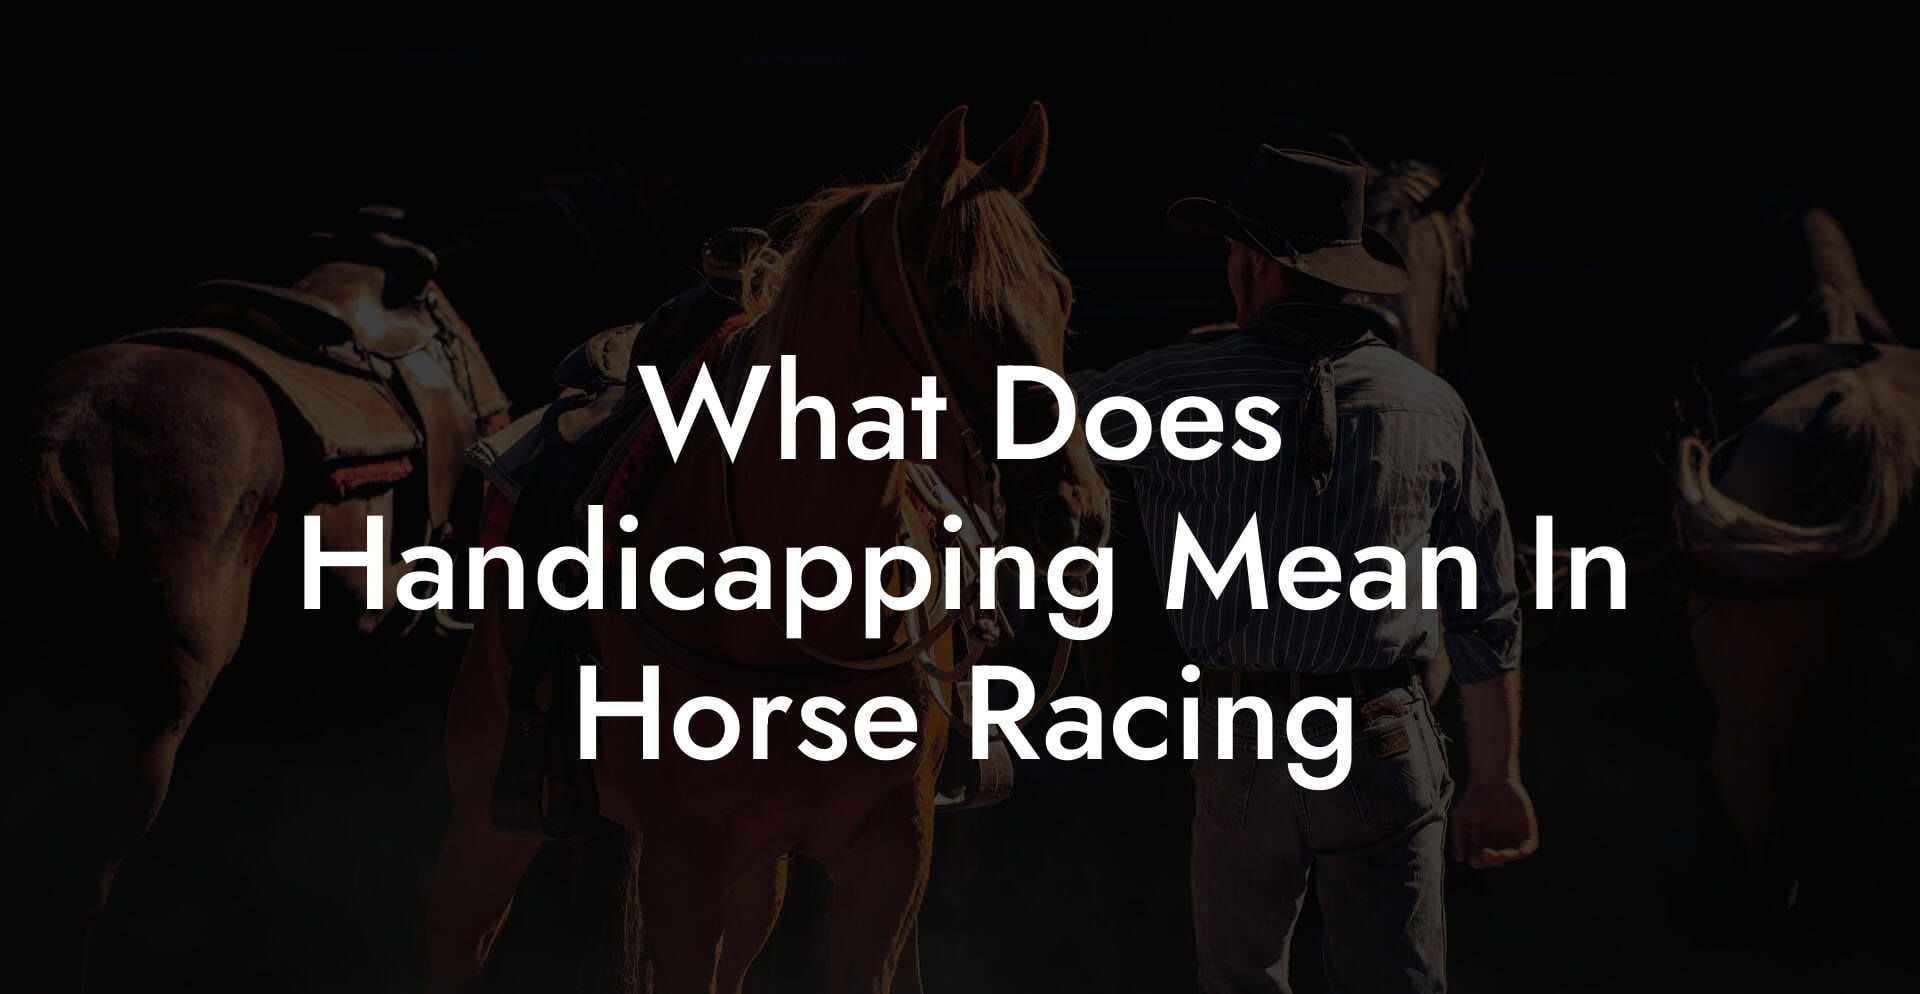 What Does Handicapping Mean In Horse Racing